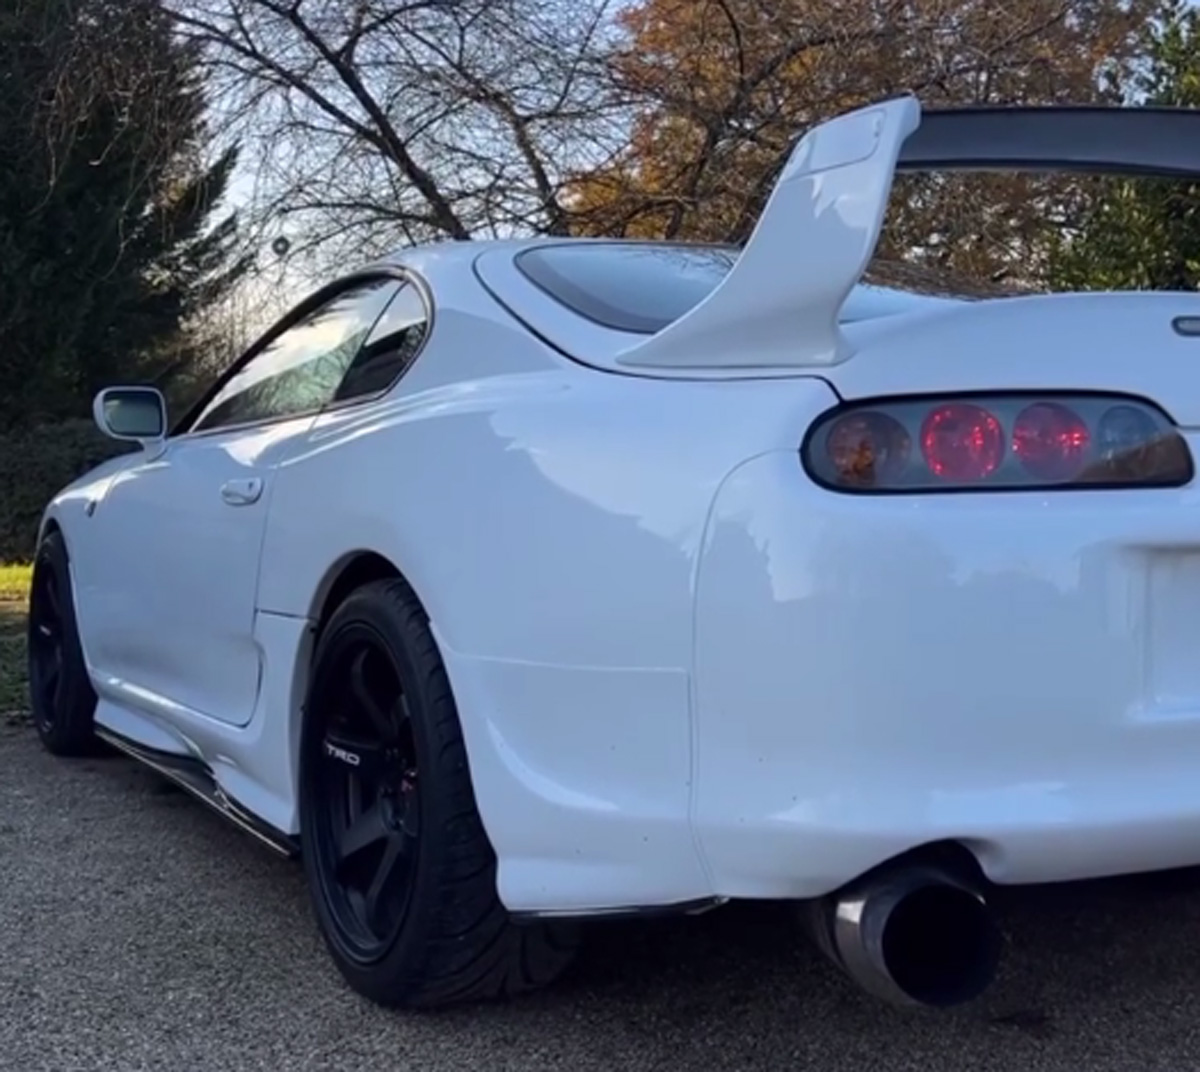 Is that a supra ??? Yes it is, a Toyota Supra MKIV Single turbo!